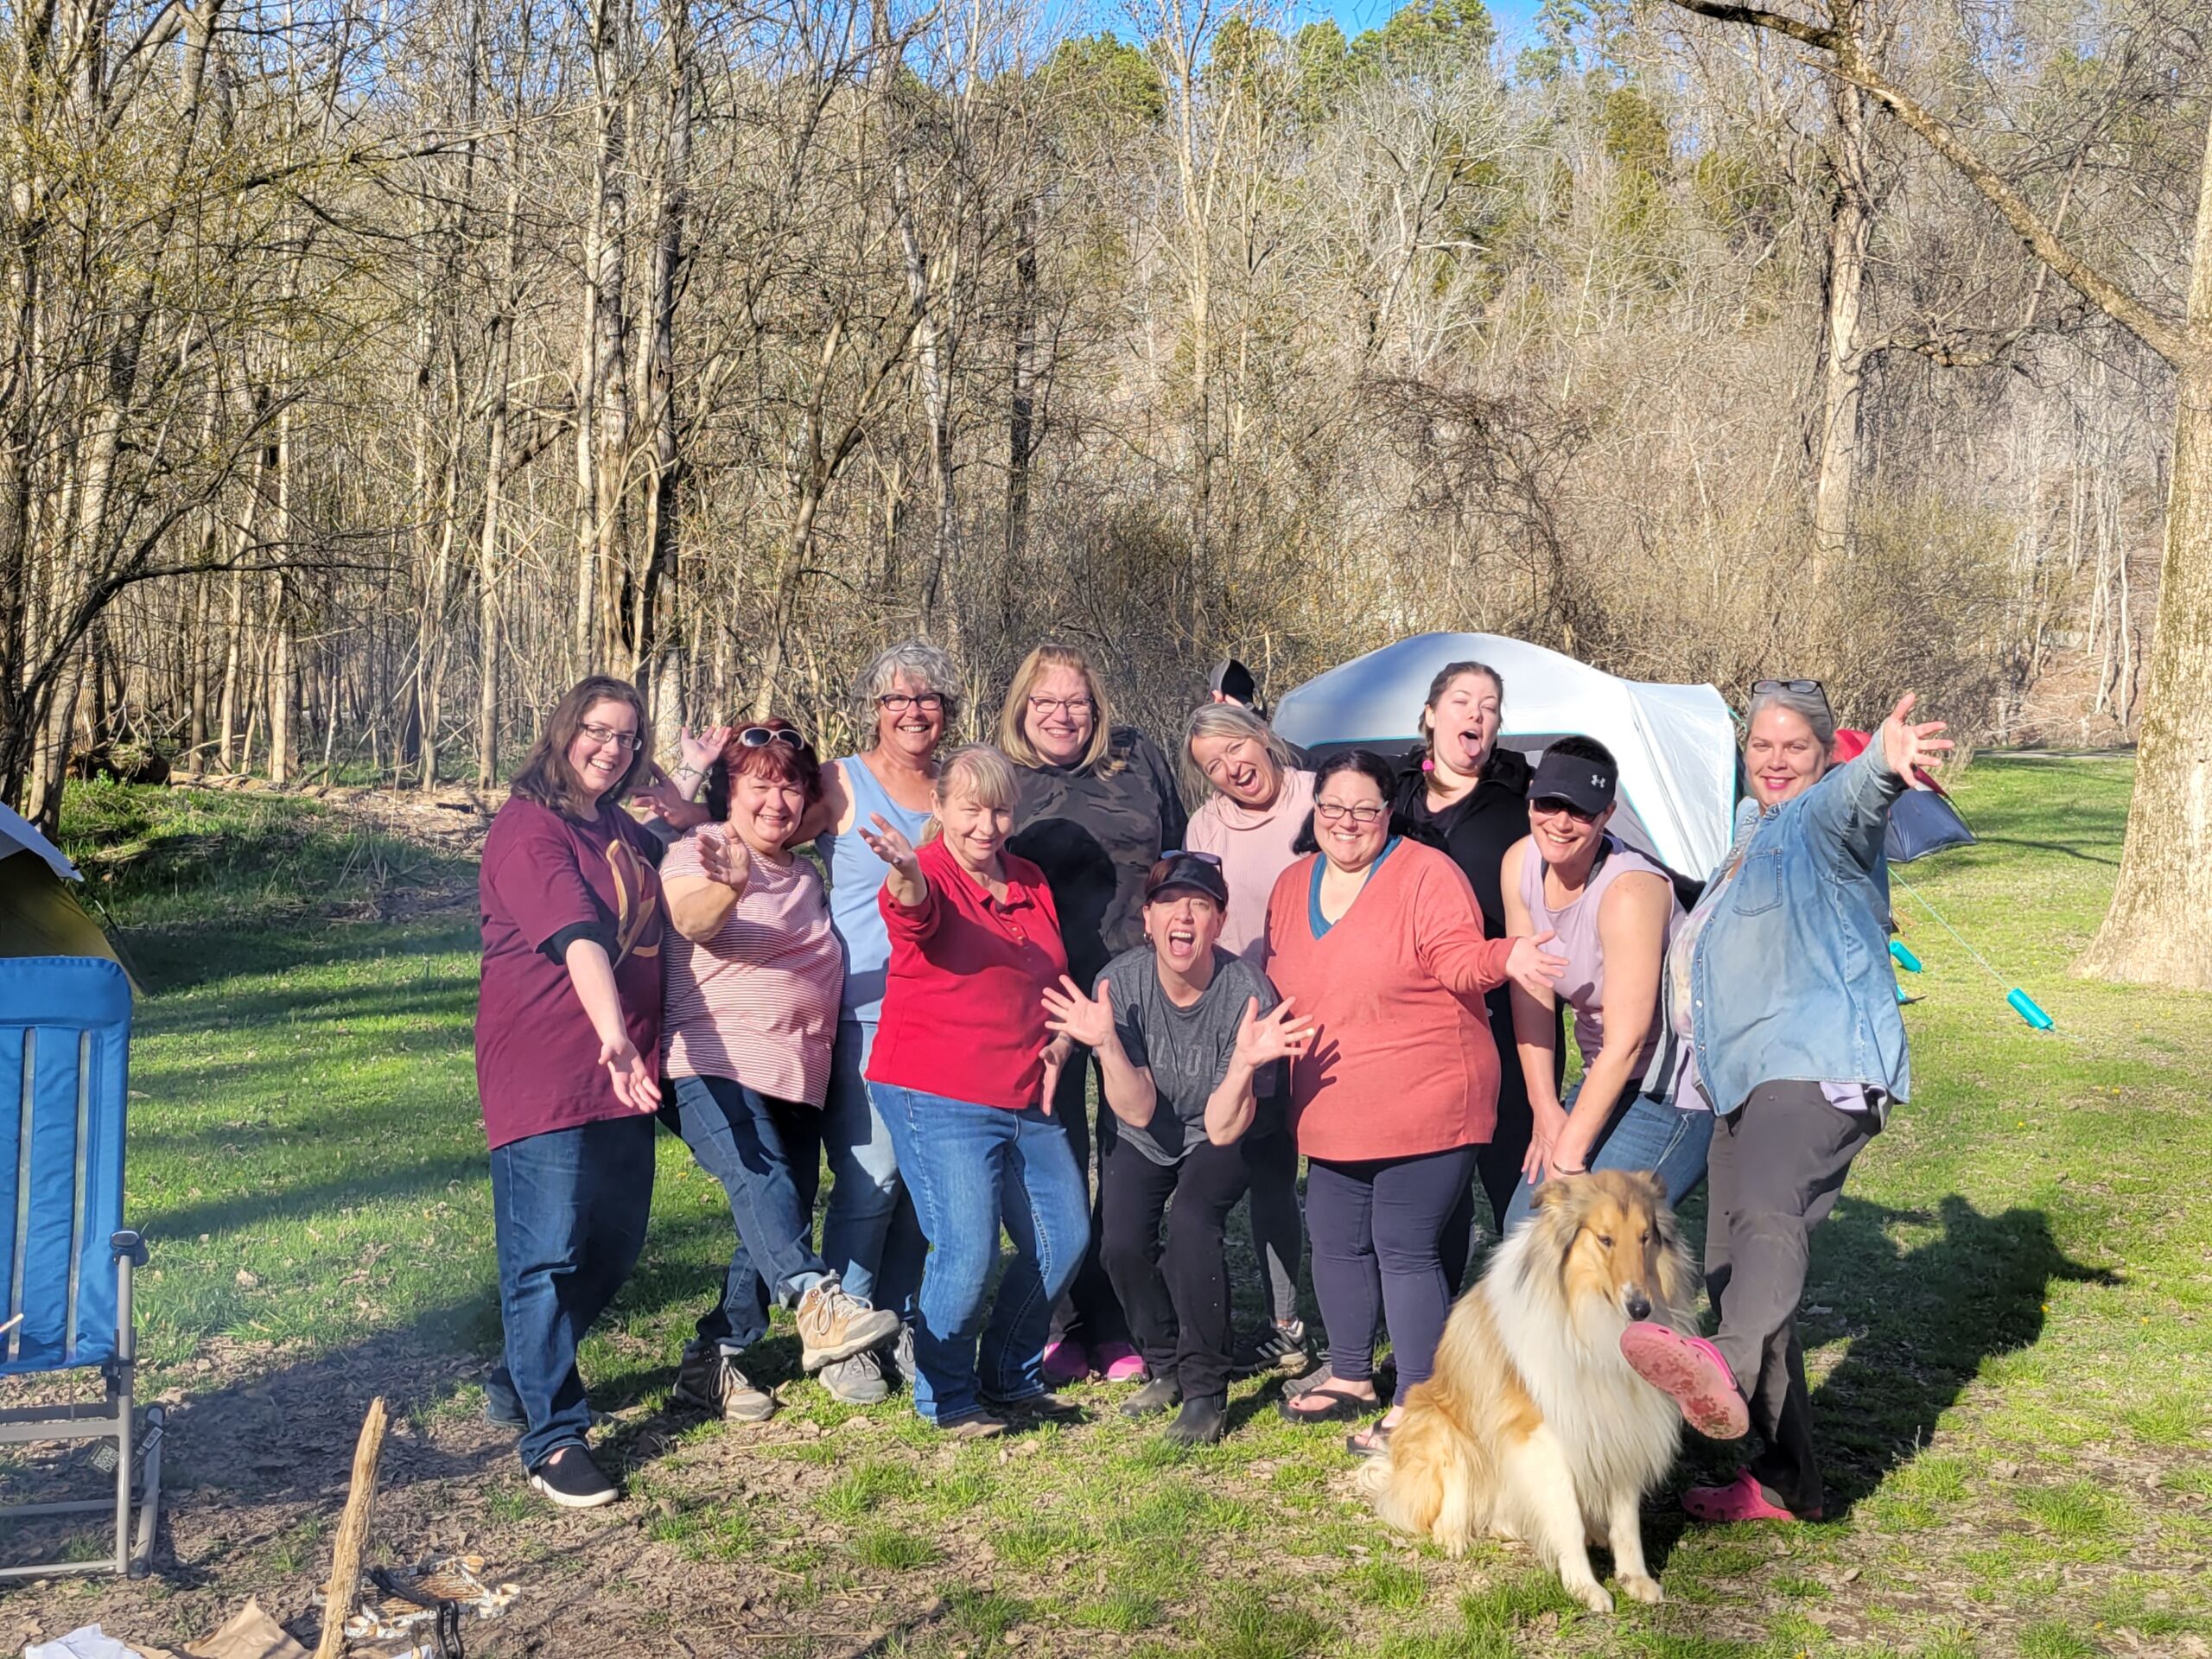 11 women in a group camping photo